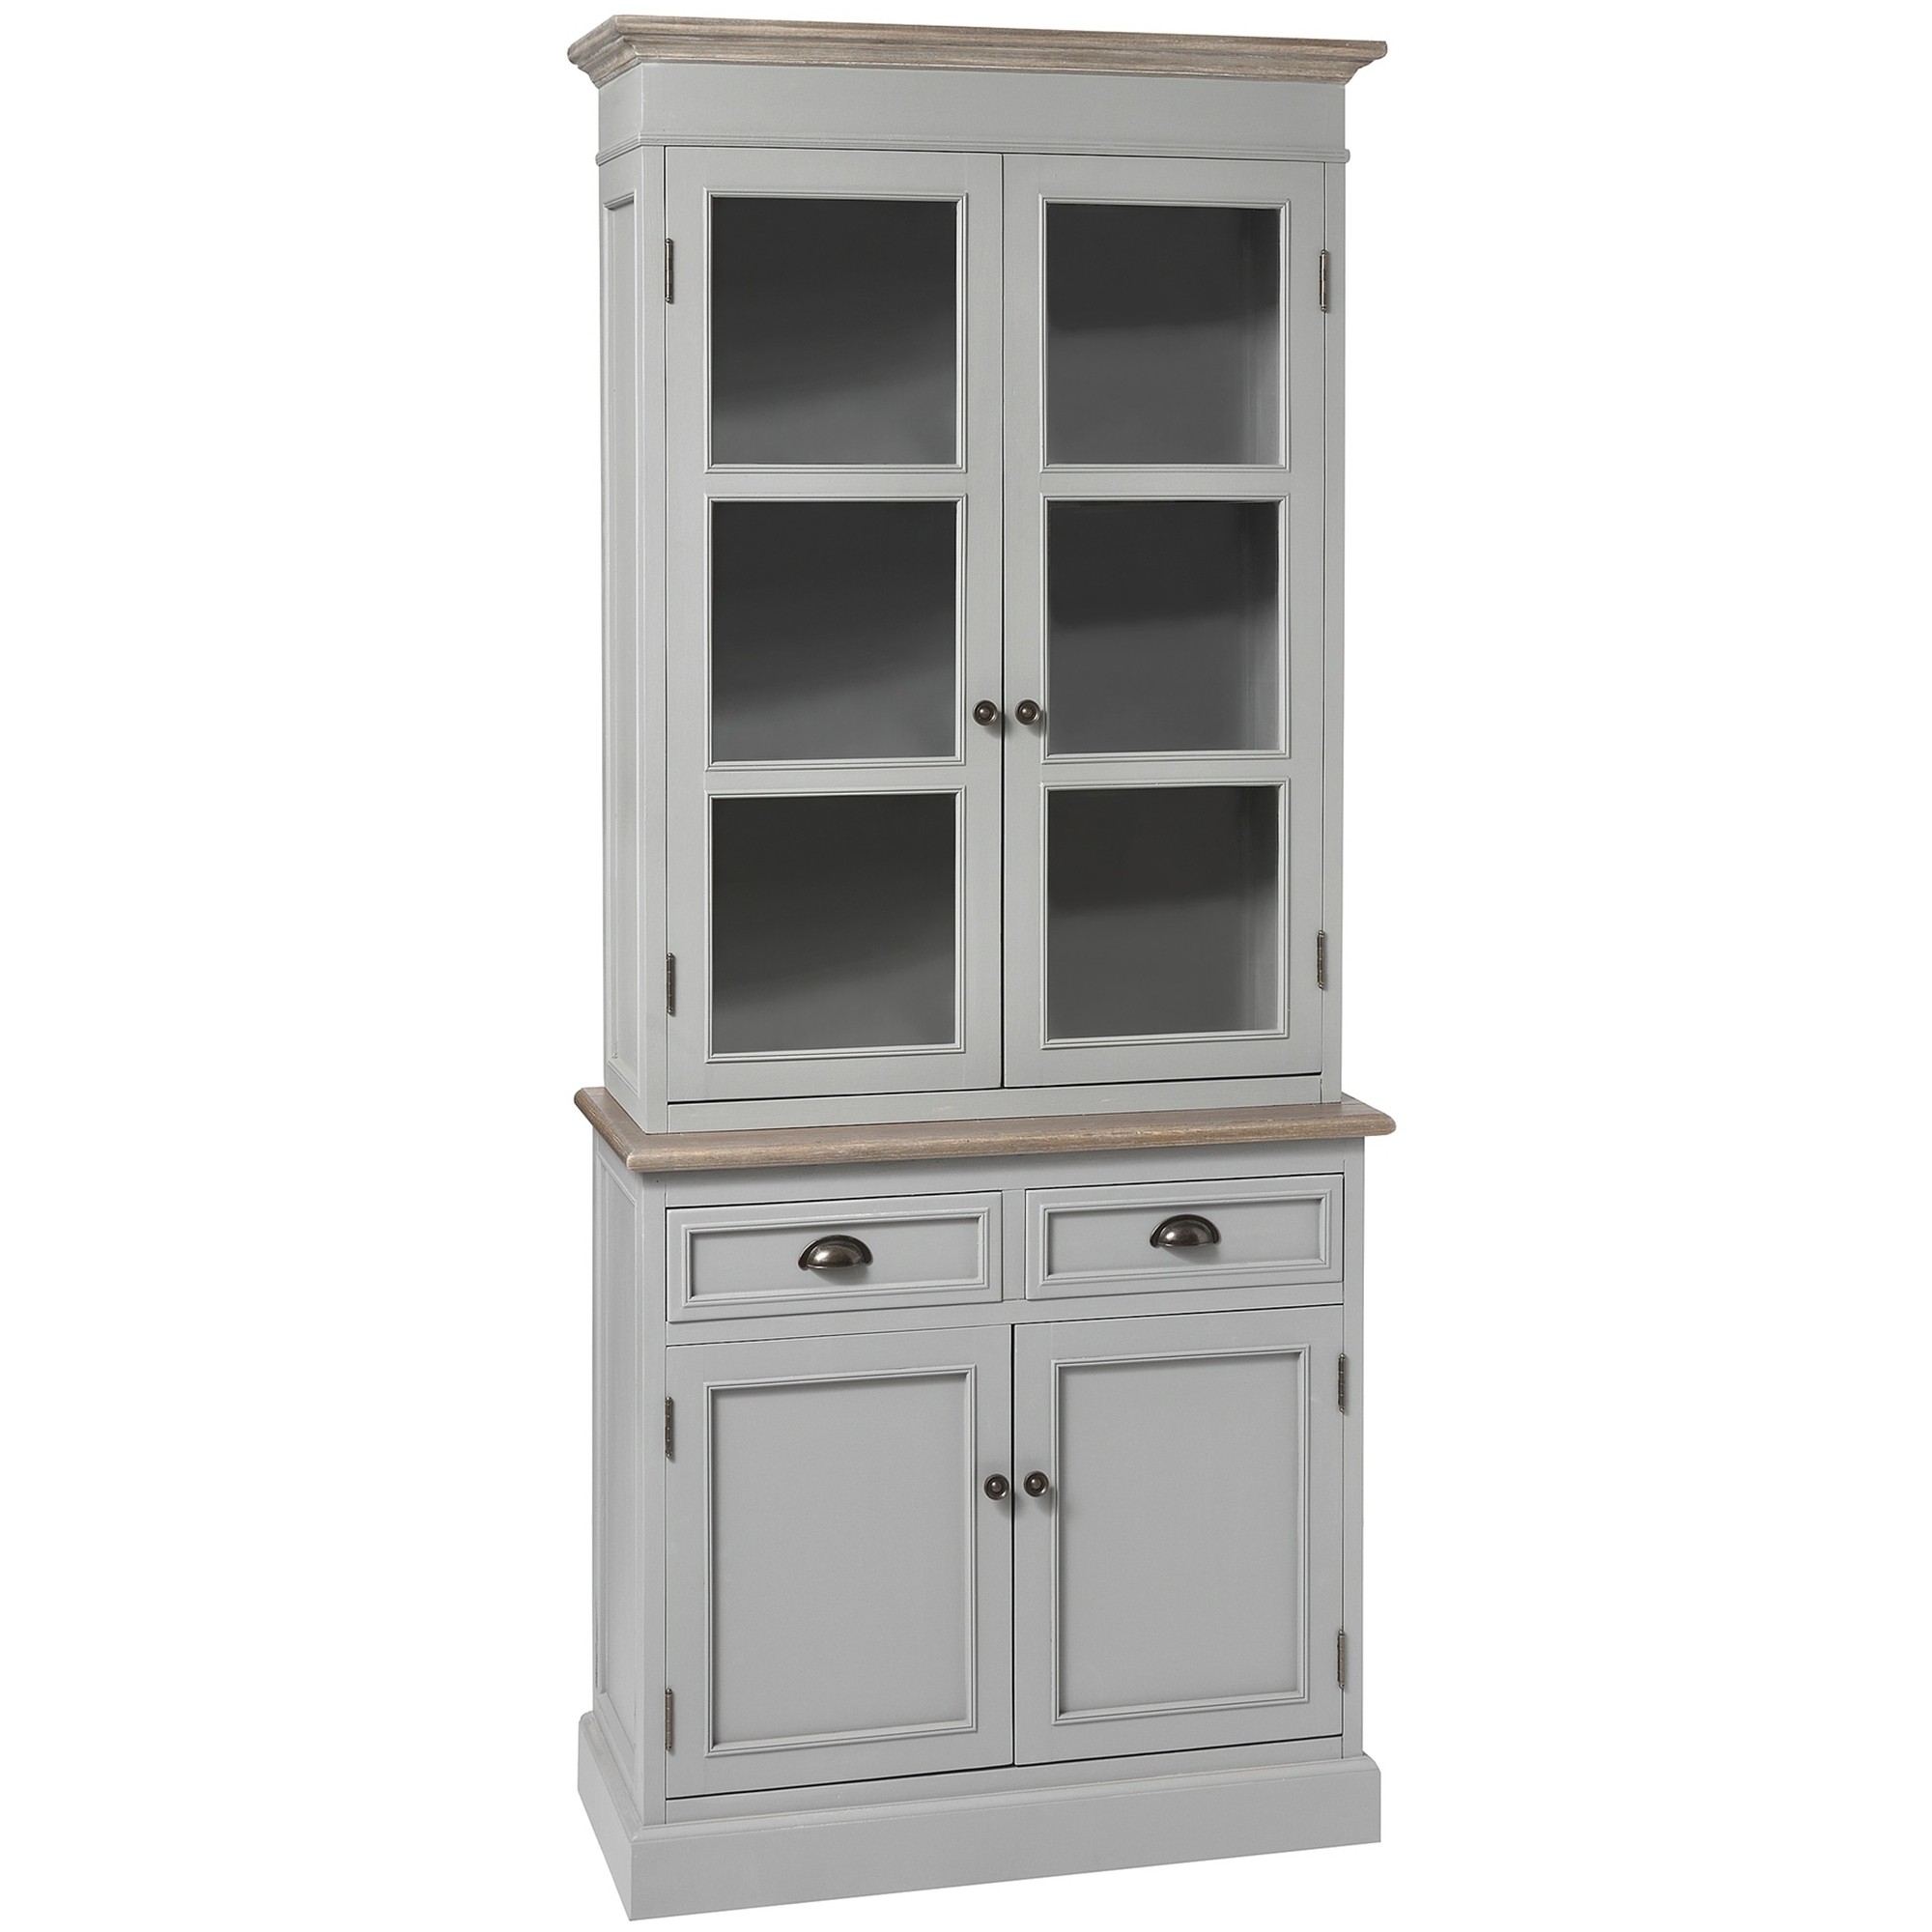 Churchill shabby chic display cabinet online now